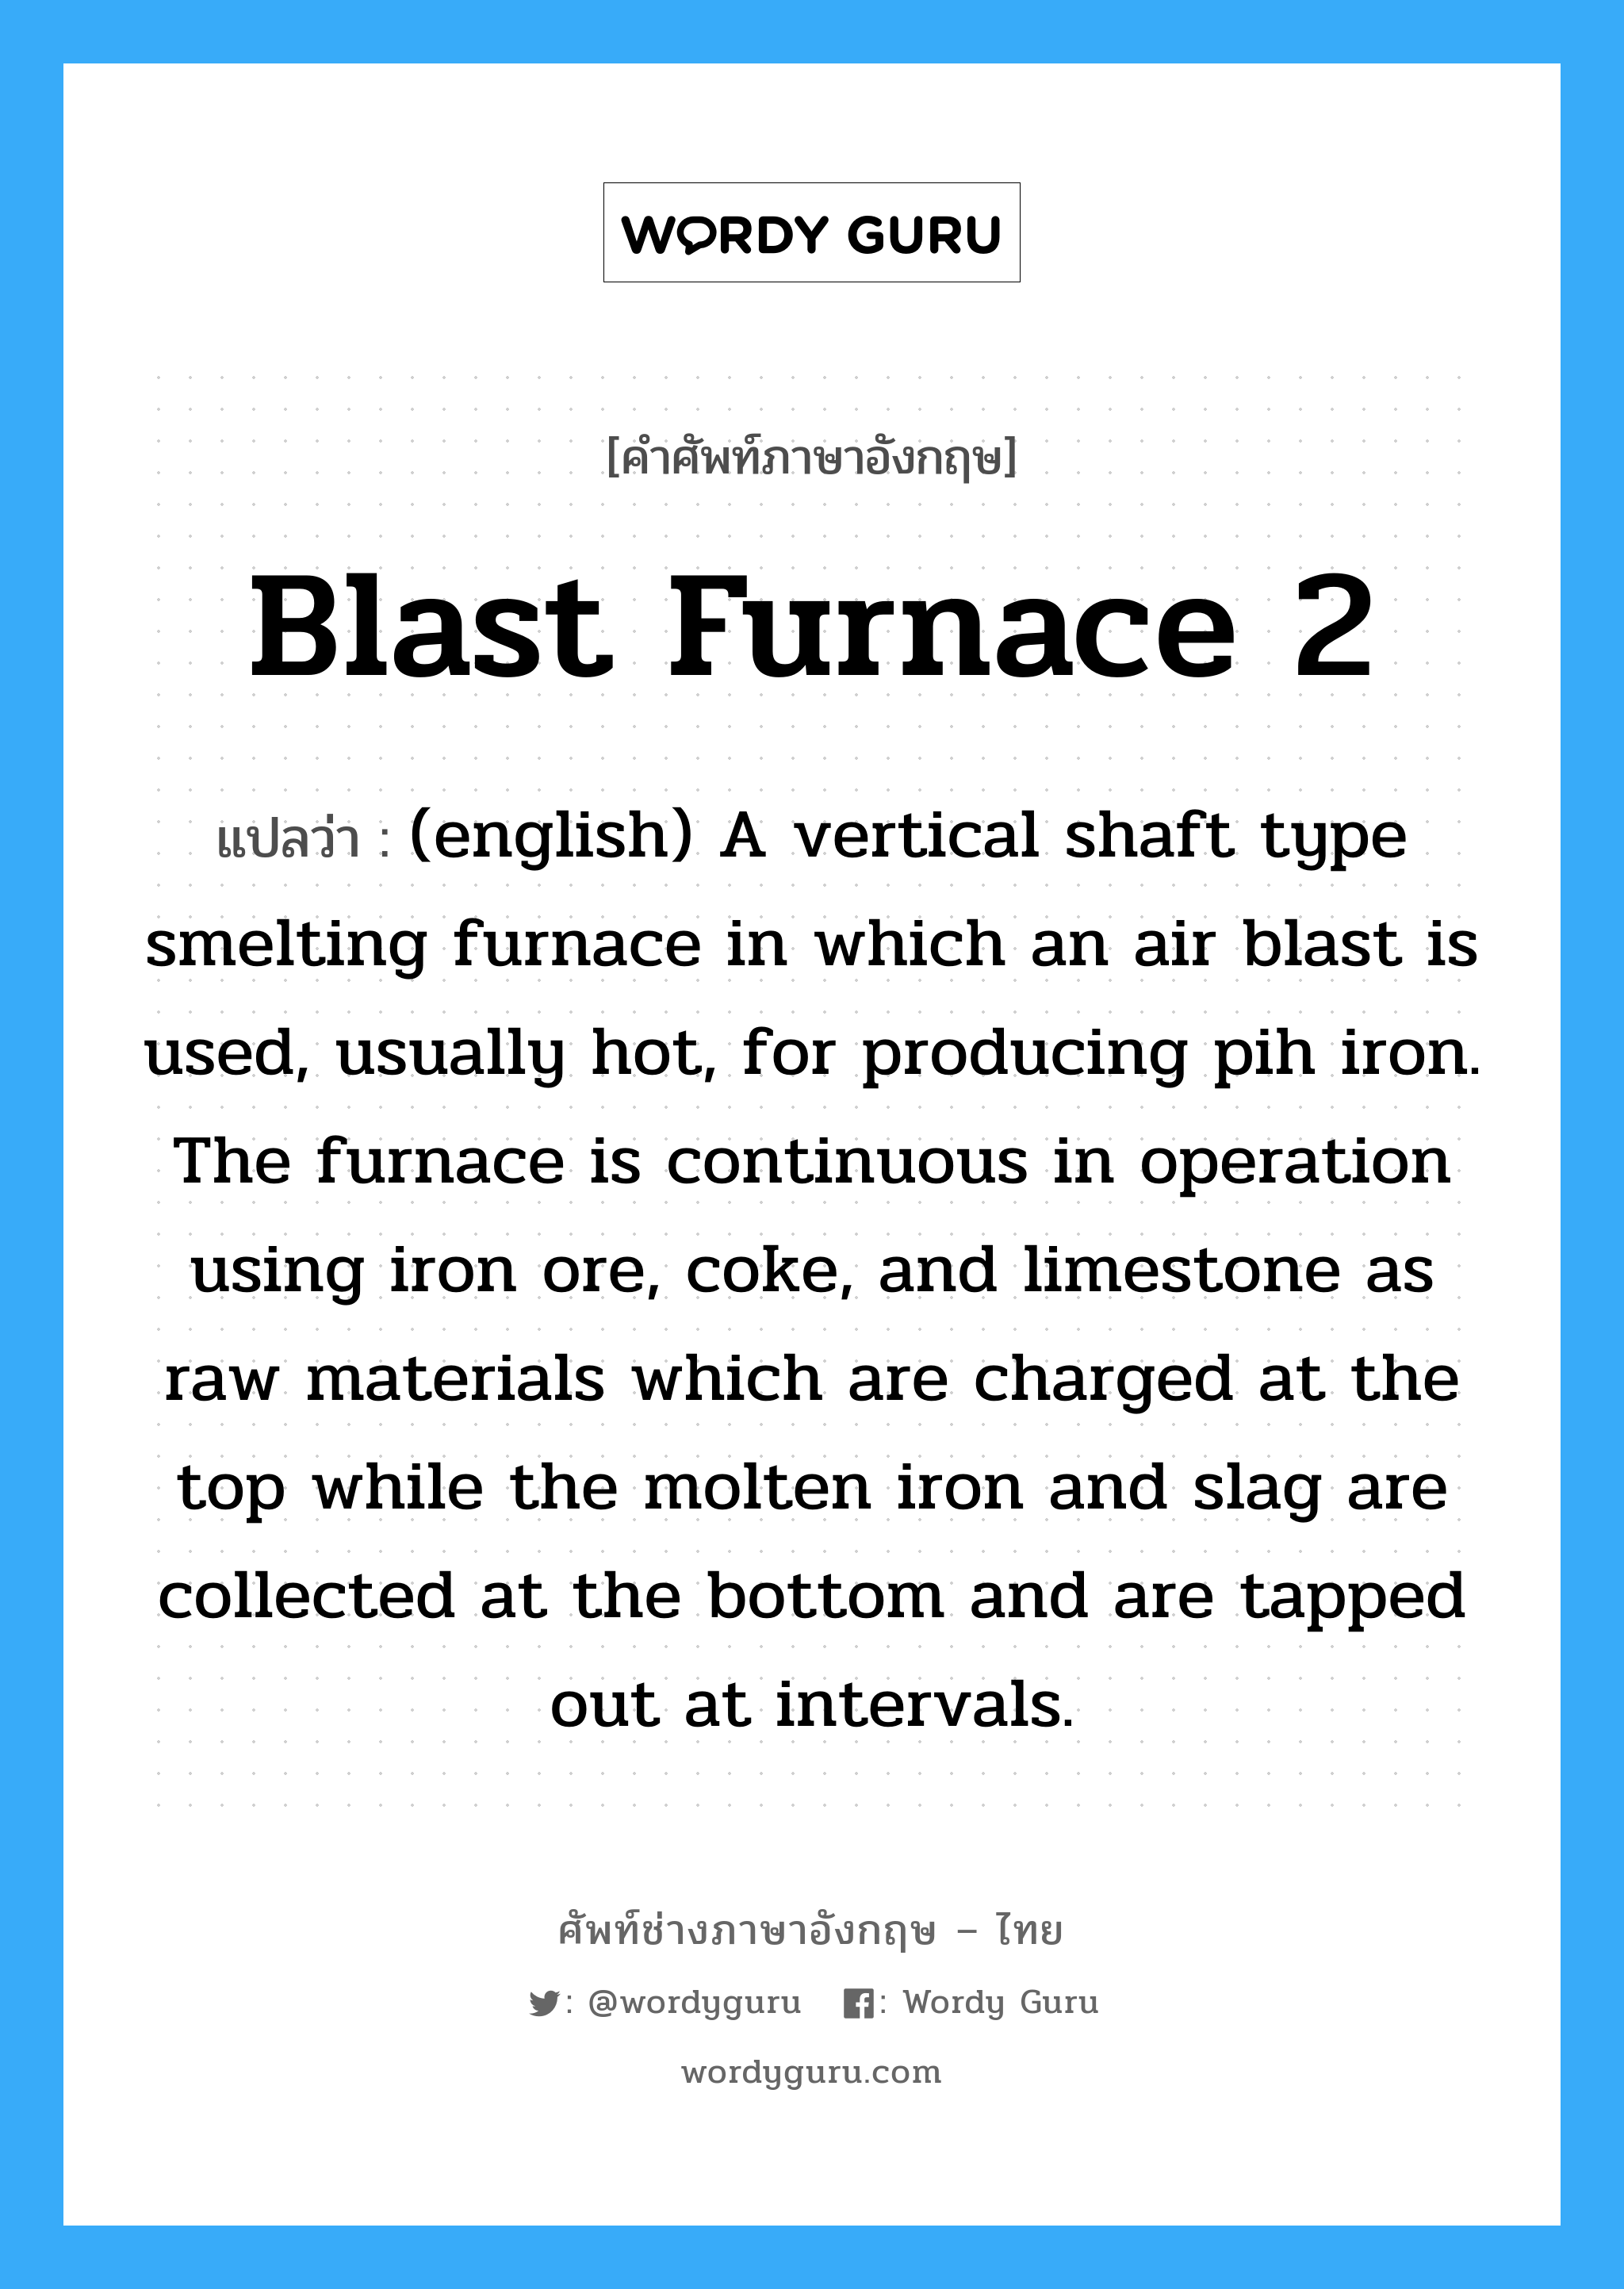 Blast Furnace 2 แปลว่า?, คำศัพท์ช่างภาษาอังกฤษ - ไทย Blast Furnace 2 คำศัพท์ภาษาอังกฤษ Blast Furnace 2 แปลว่า (english) A vertical shaft type smelting furnace in which an air blast is used, usually hot, for producing pih iron. The furnace is continuous in operation using iron ore, coke, and limestone as raw materials which are charged at the top while the molten iron and slag are collected at the bottom and are tapped out at intervals.